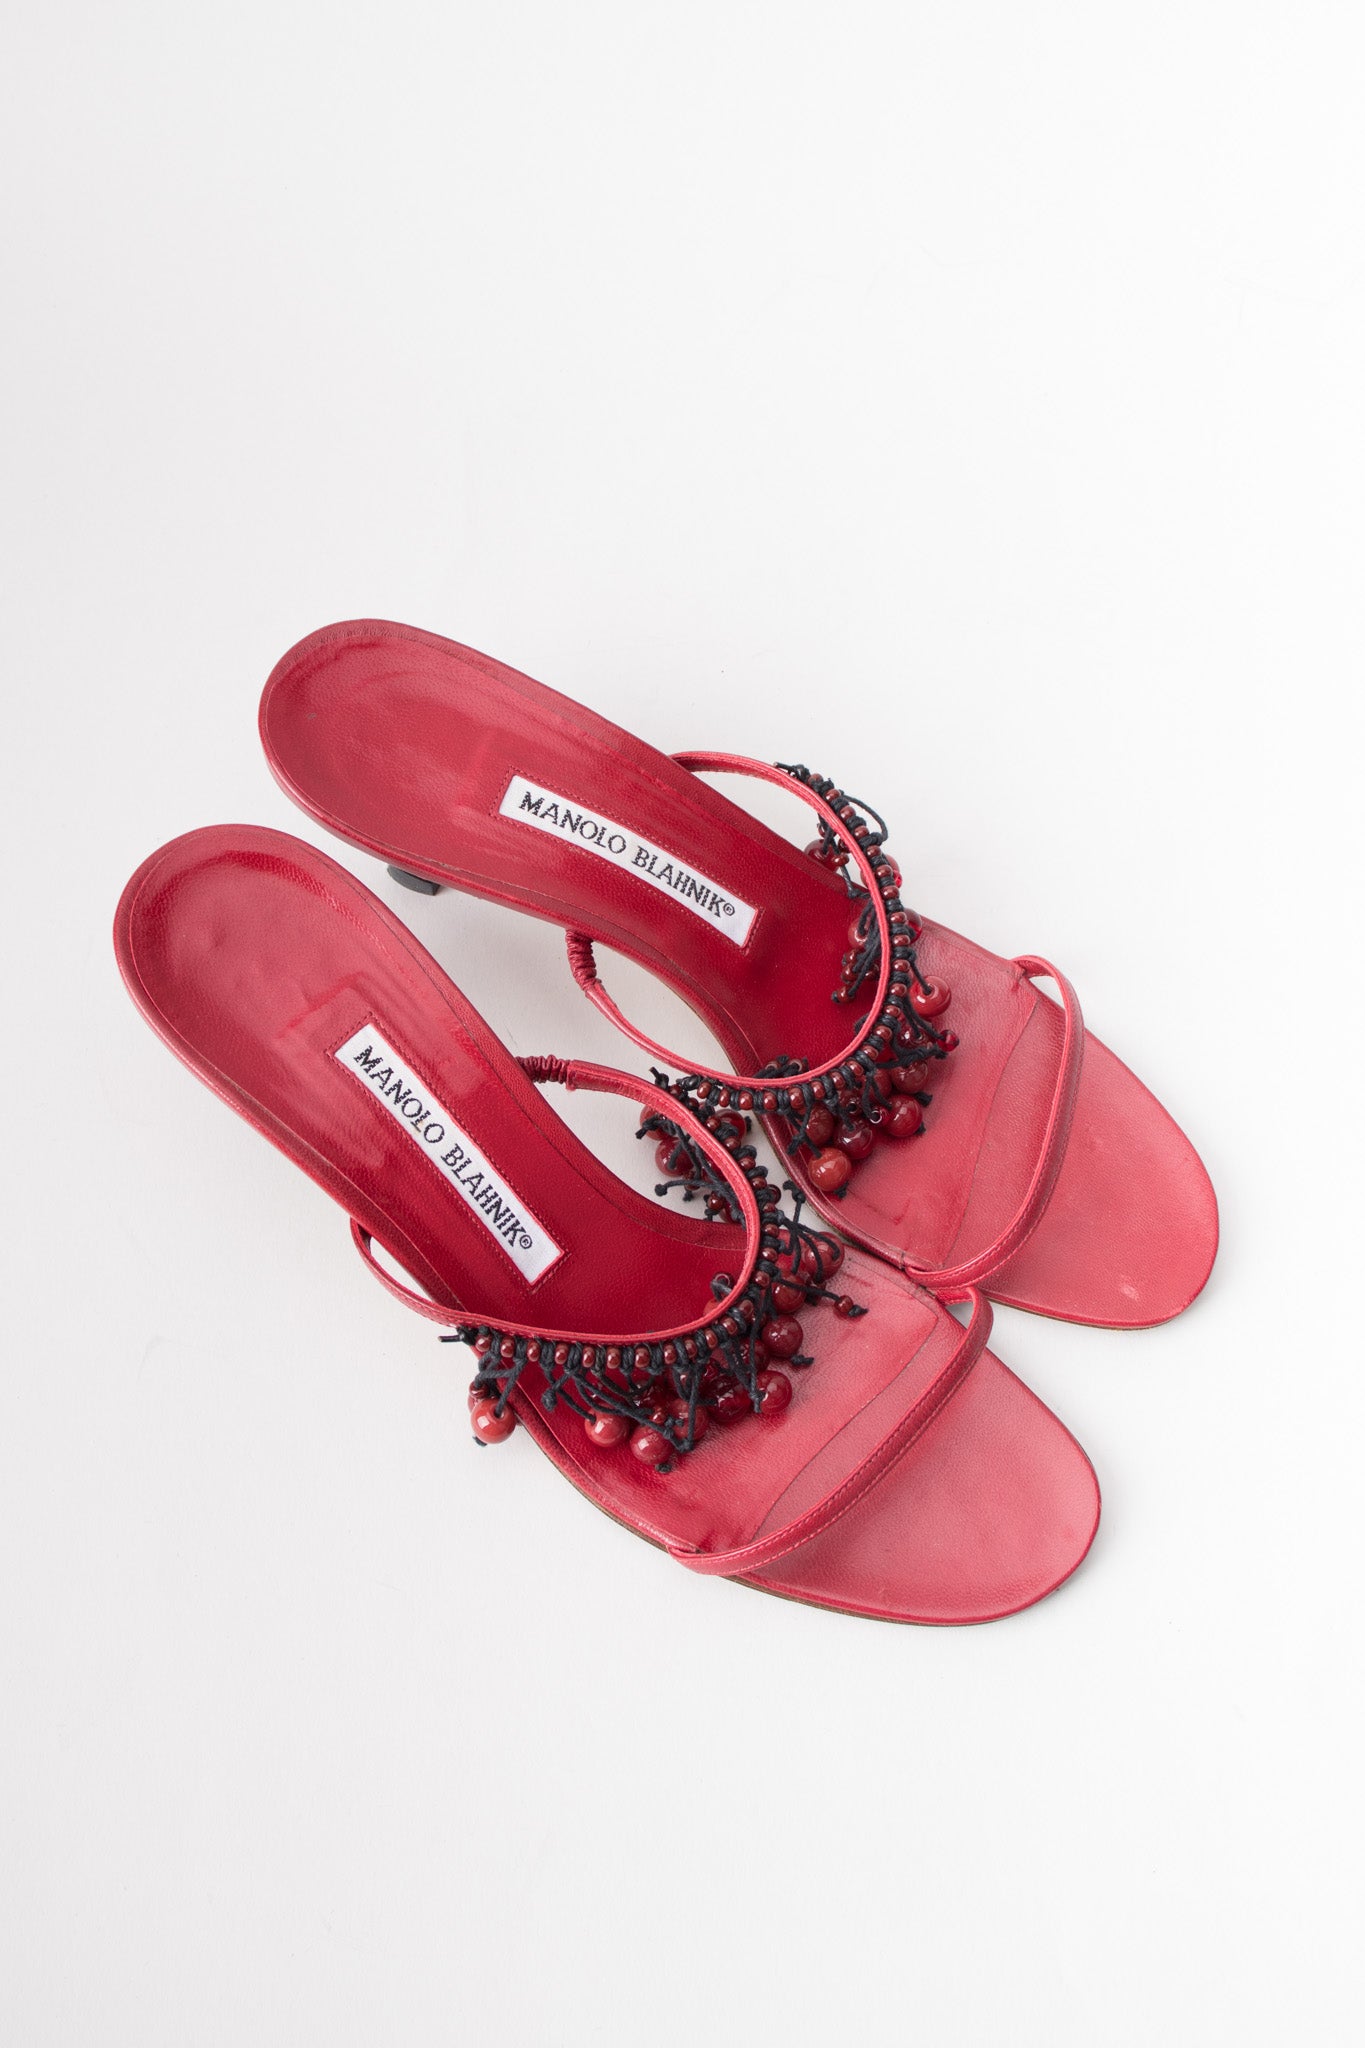 Manolo Blahnik Strappy Currant Berry Fringed Mule Sandals